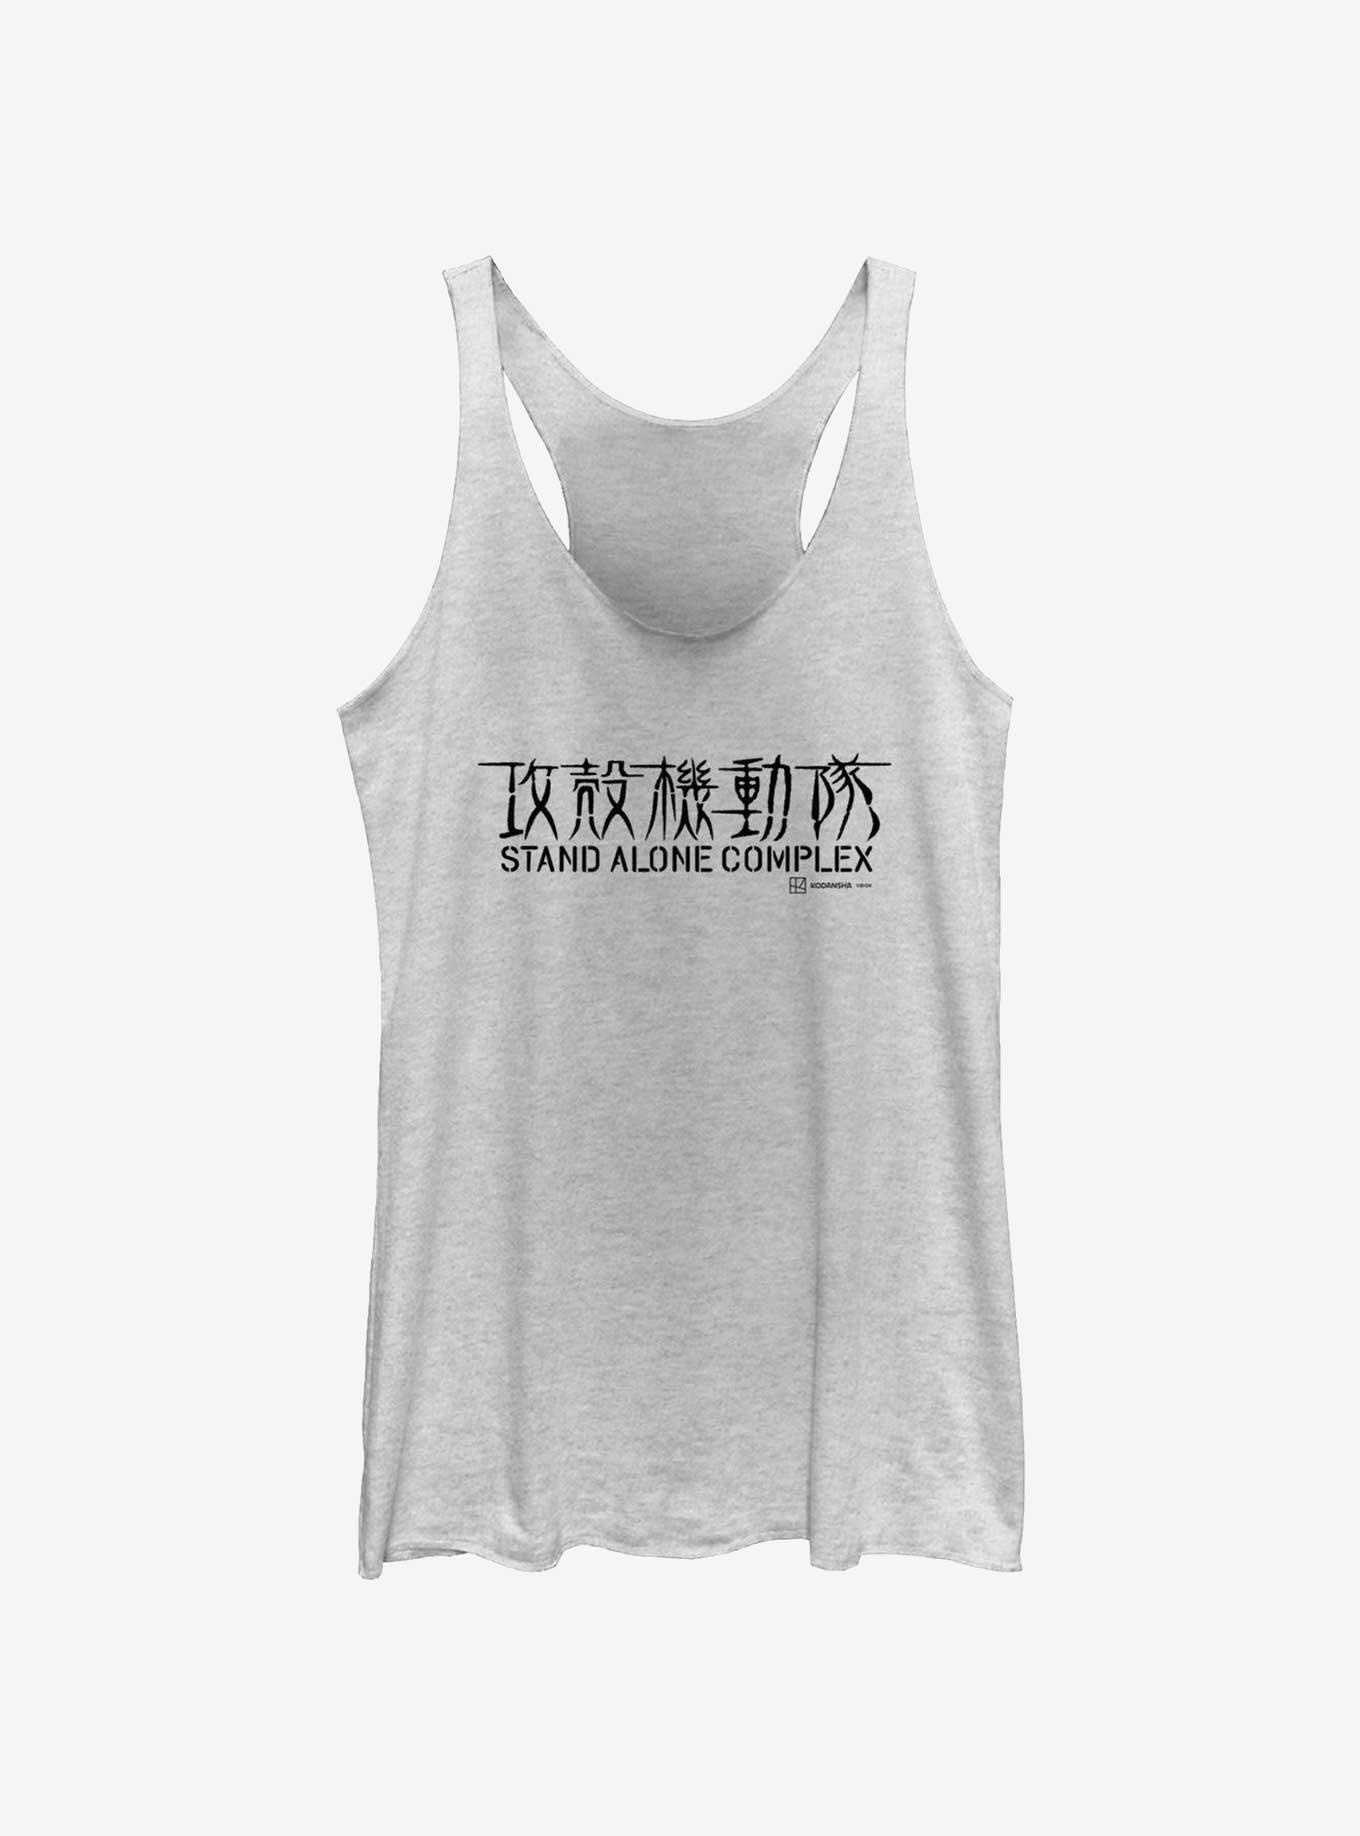 Ghost in the Shell Stand Alone Complex Logo Womens Tank Top, WHITE HTR, hi-res